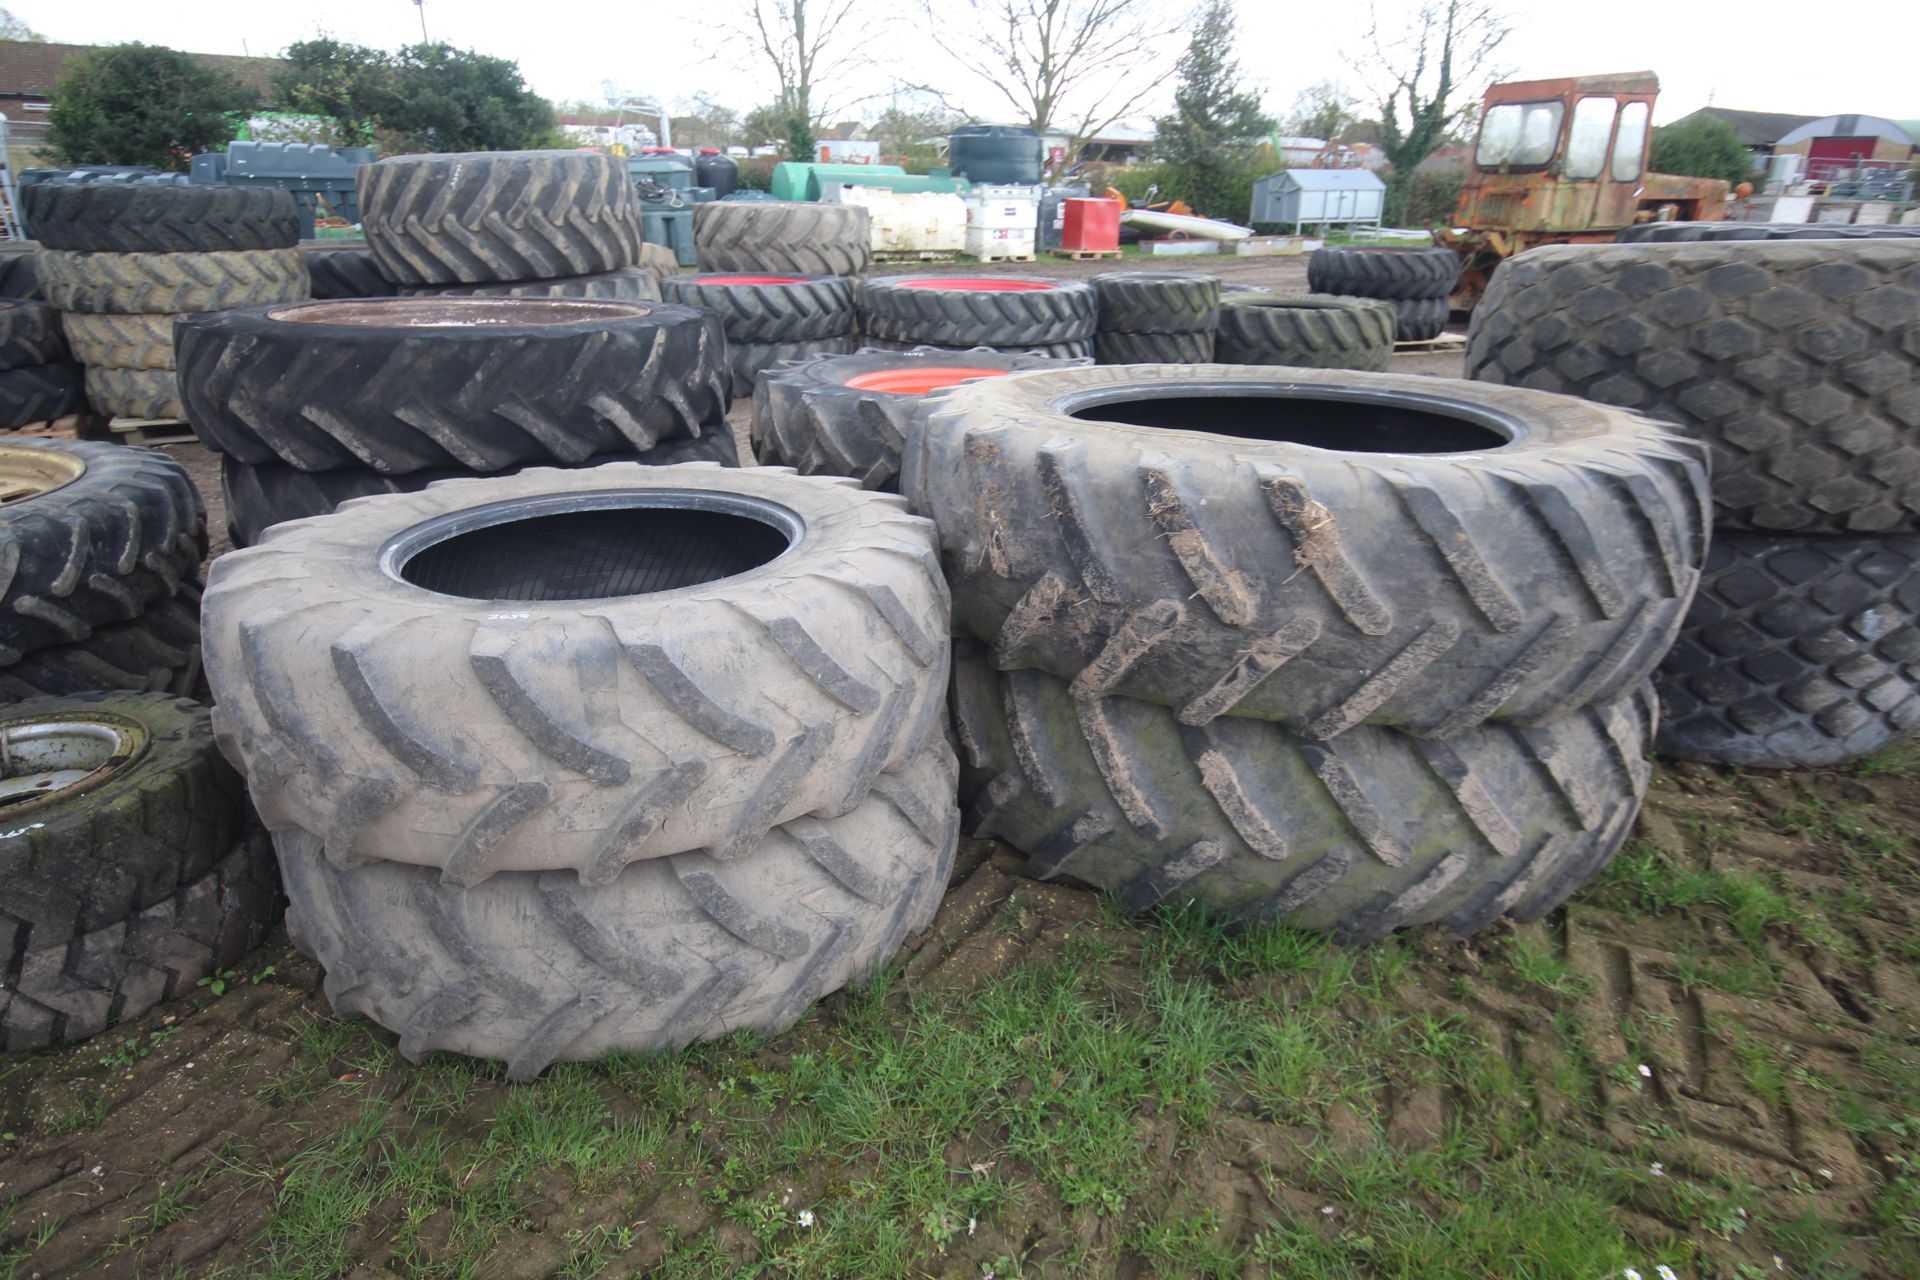 Set of tyres. Comprising 520/85R42 rears and 16.9R